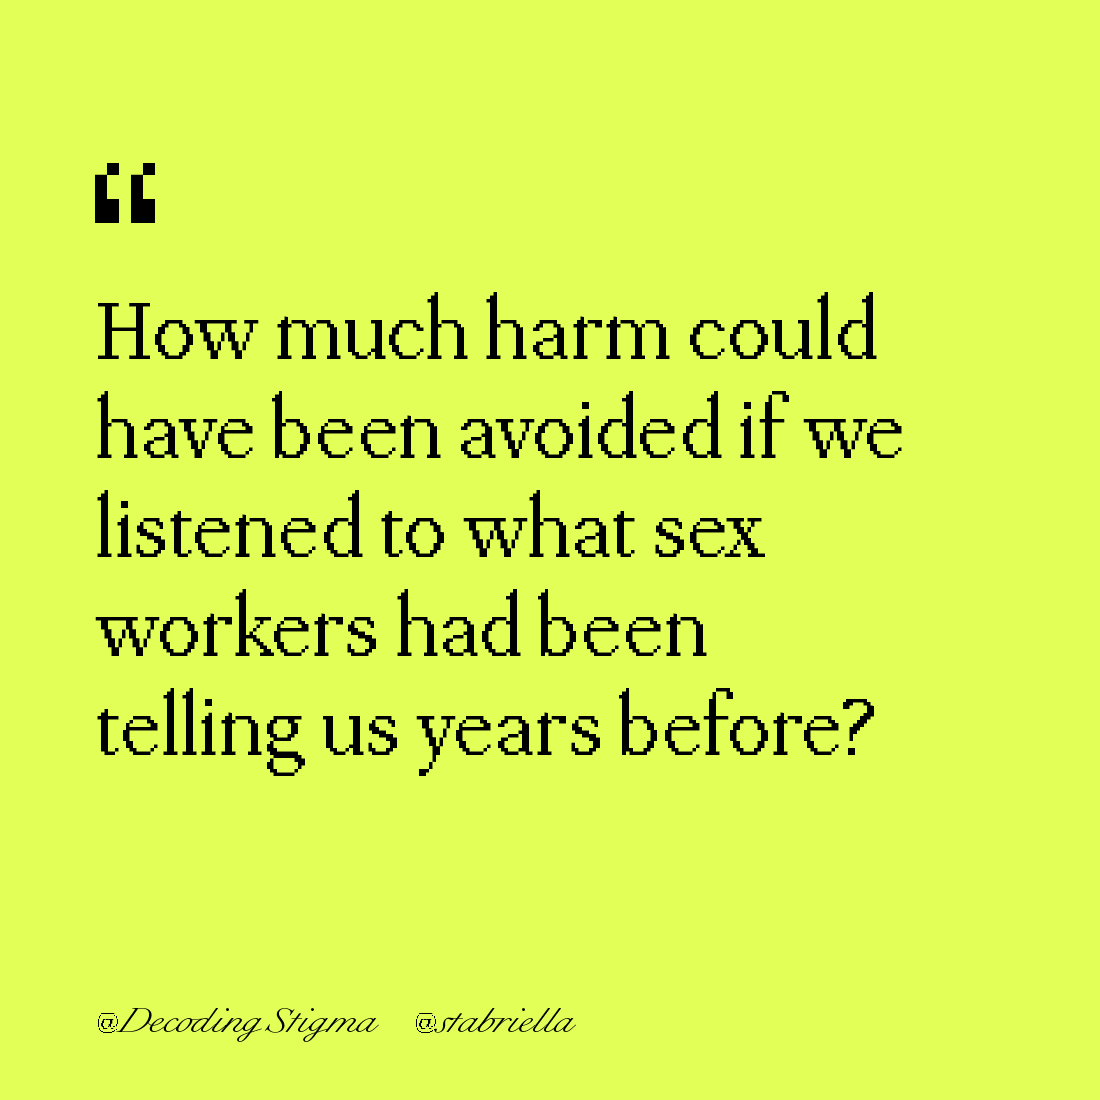 "How much harm could have been avoided if we listened to what sex workers had been telling us years before?"